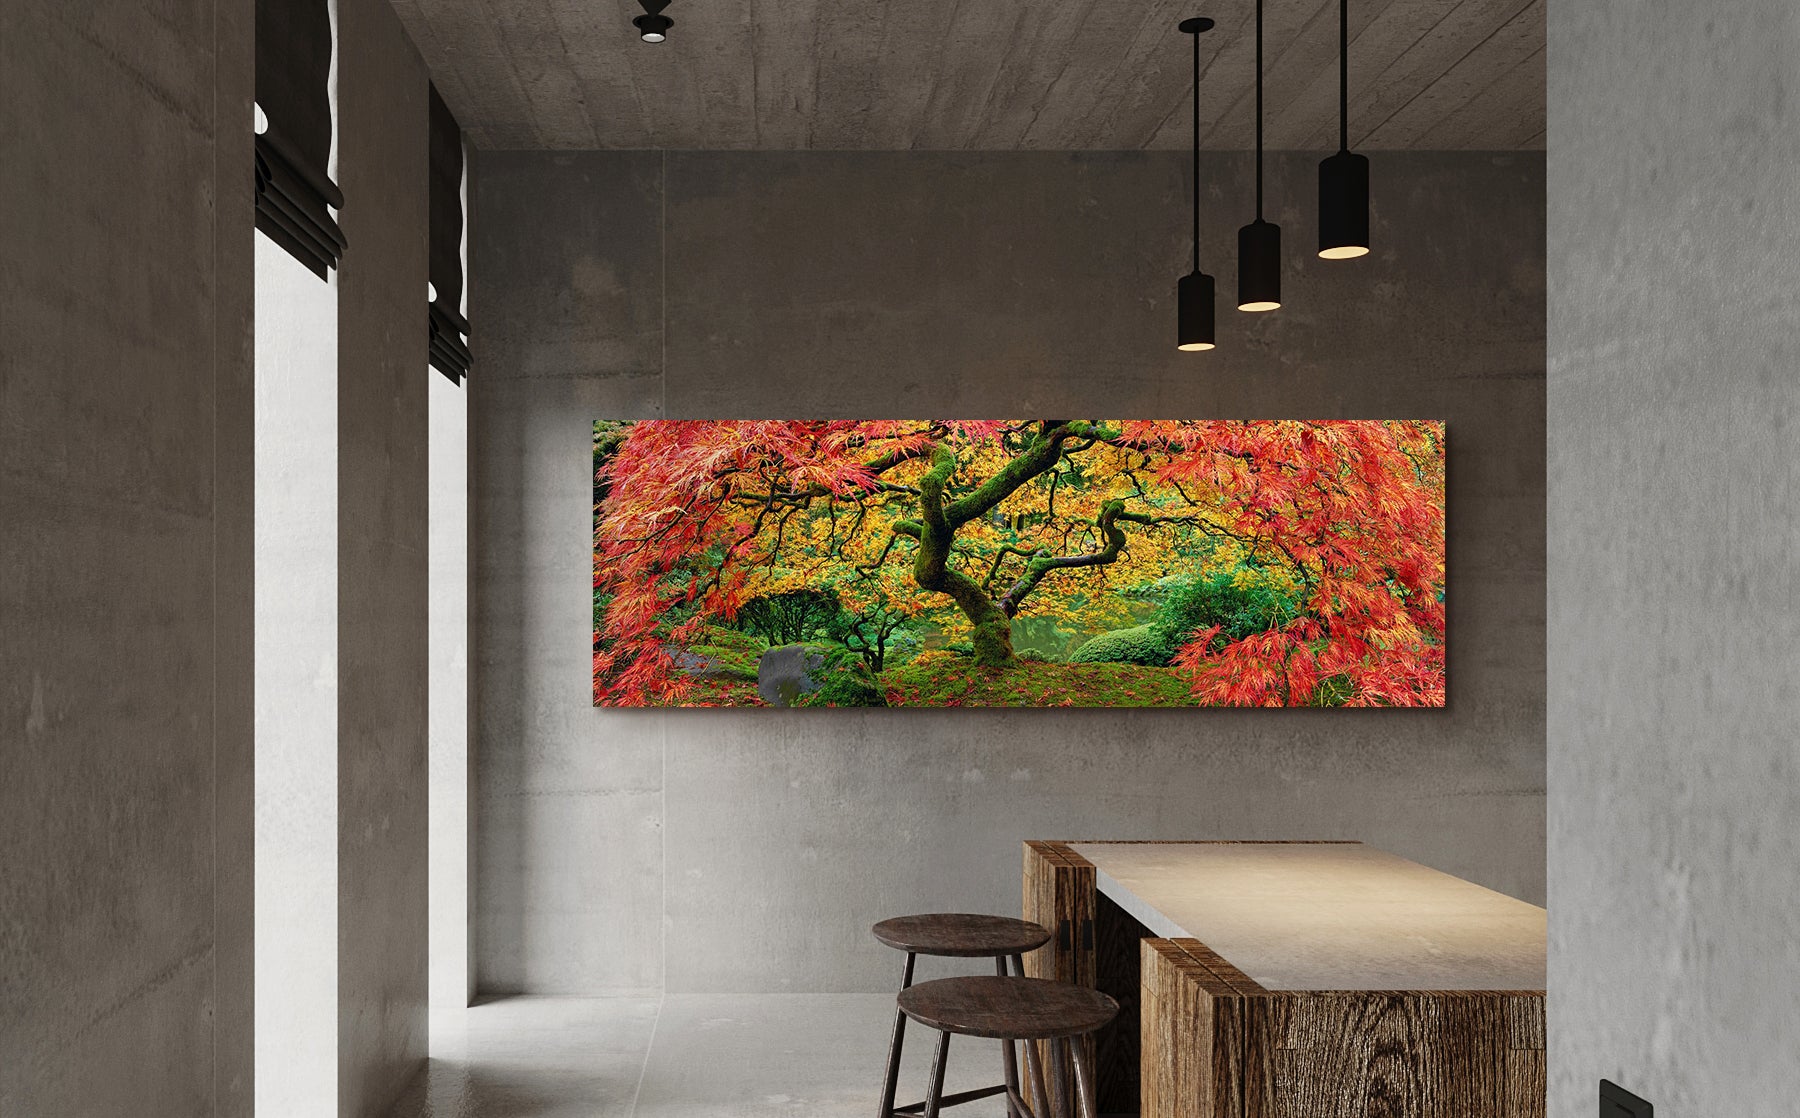 Large Peter Lik photograph of a colorful Japanese Maple tree hanging on a concrete wall near a table